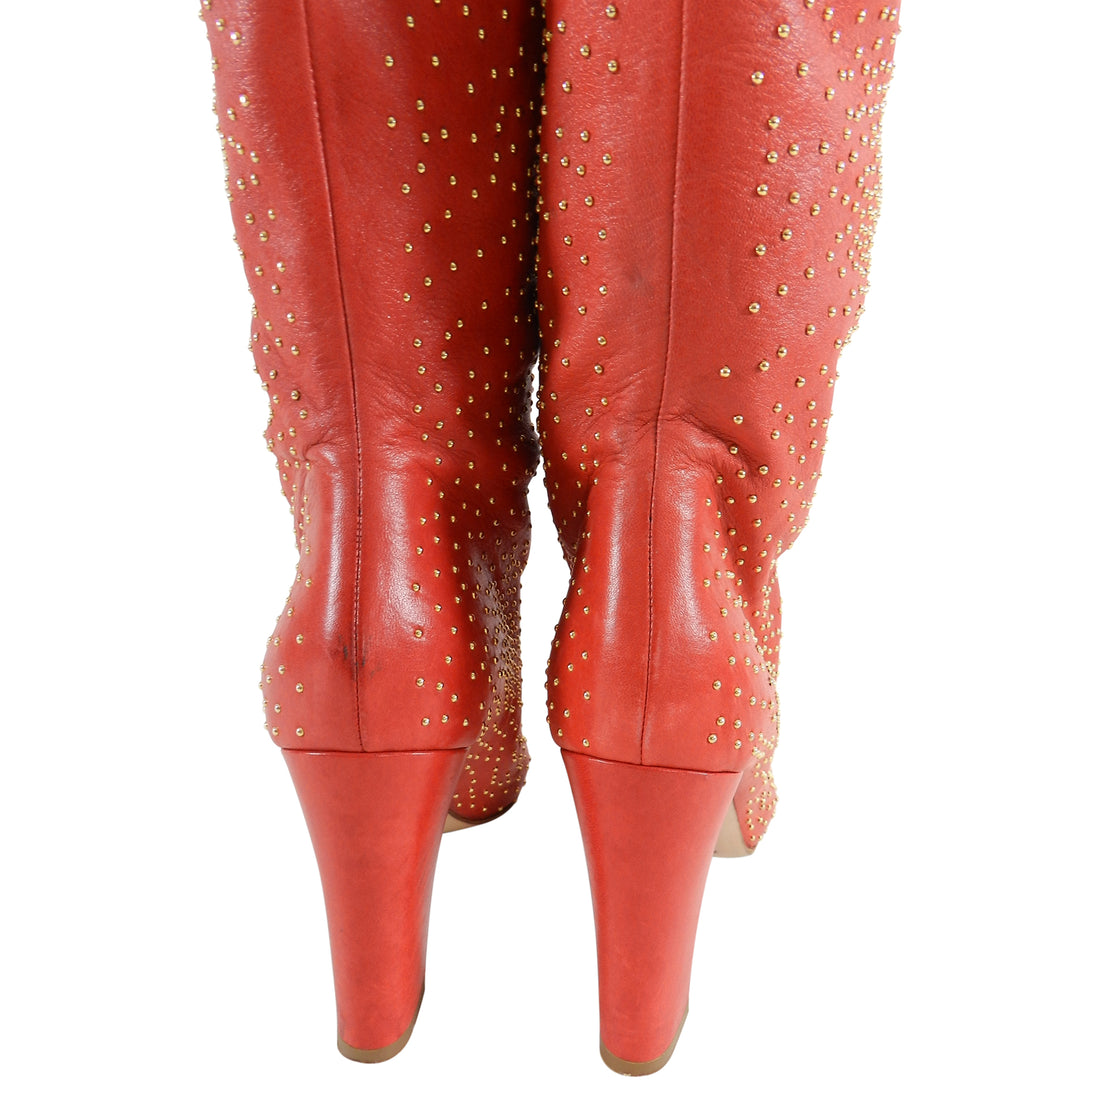 Chloe Tall Red Leather Boots with Gold Studs - 37